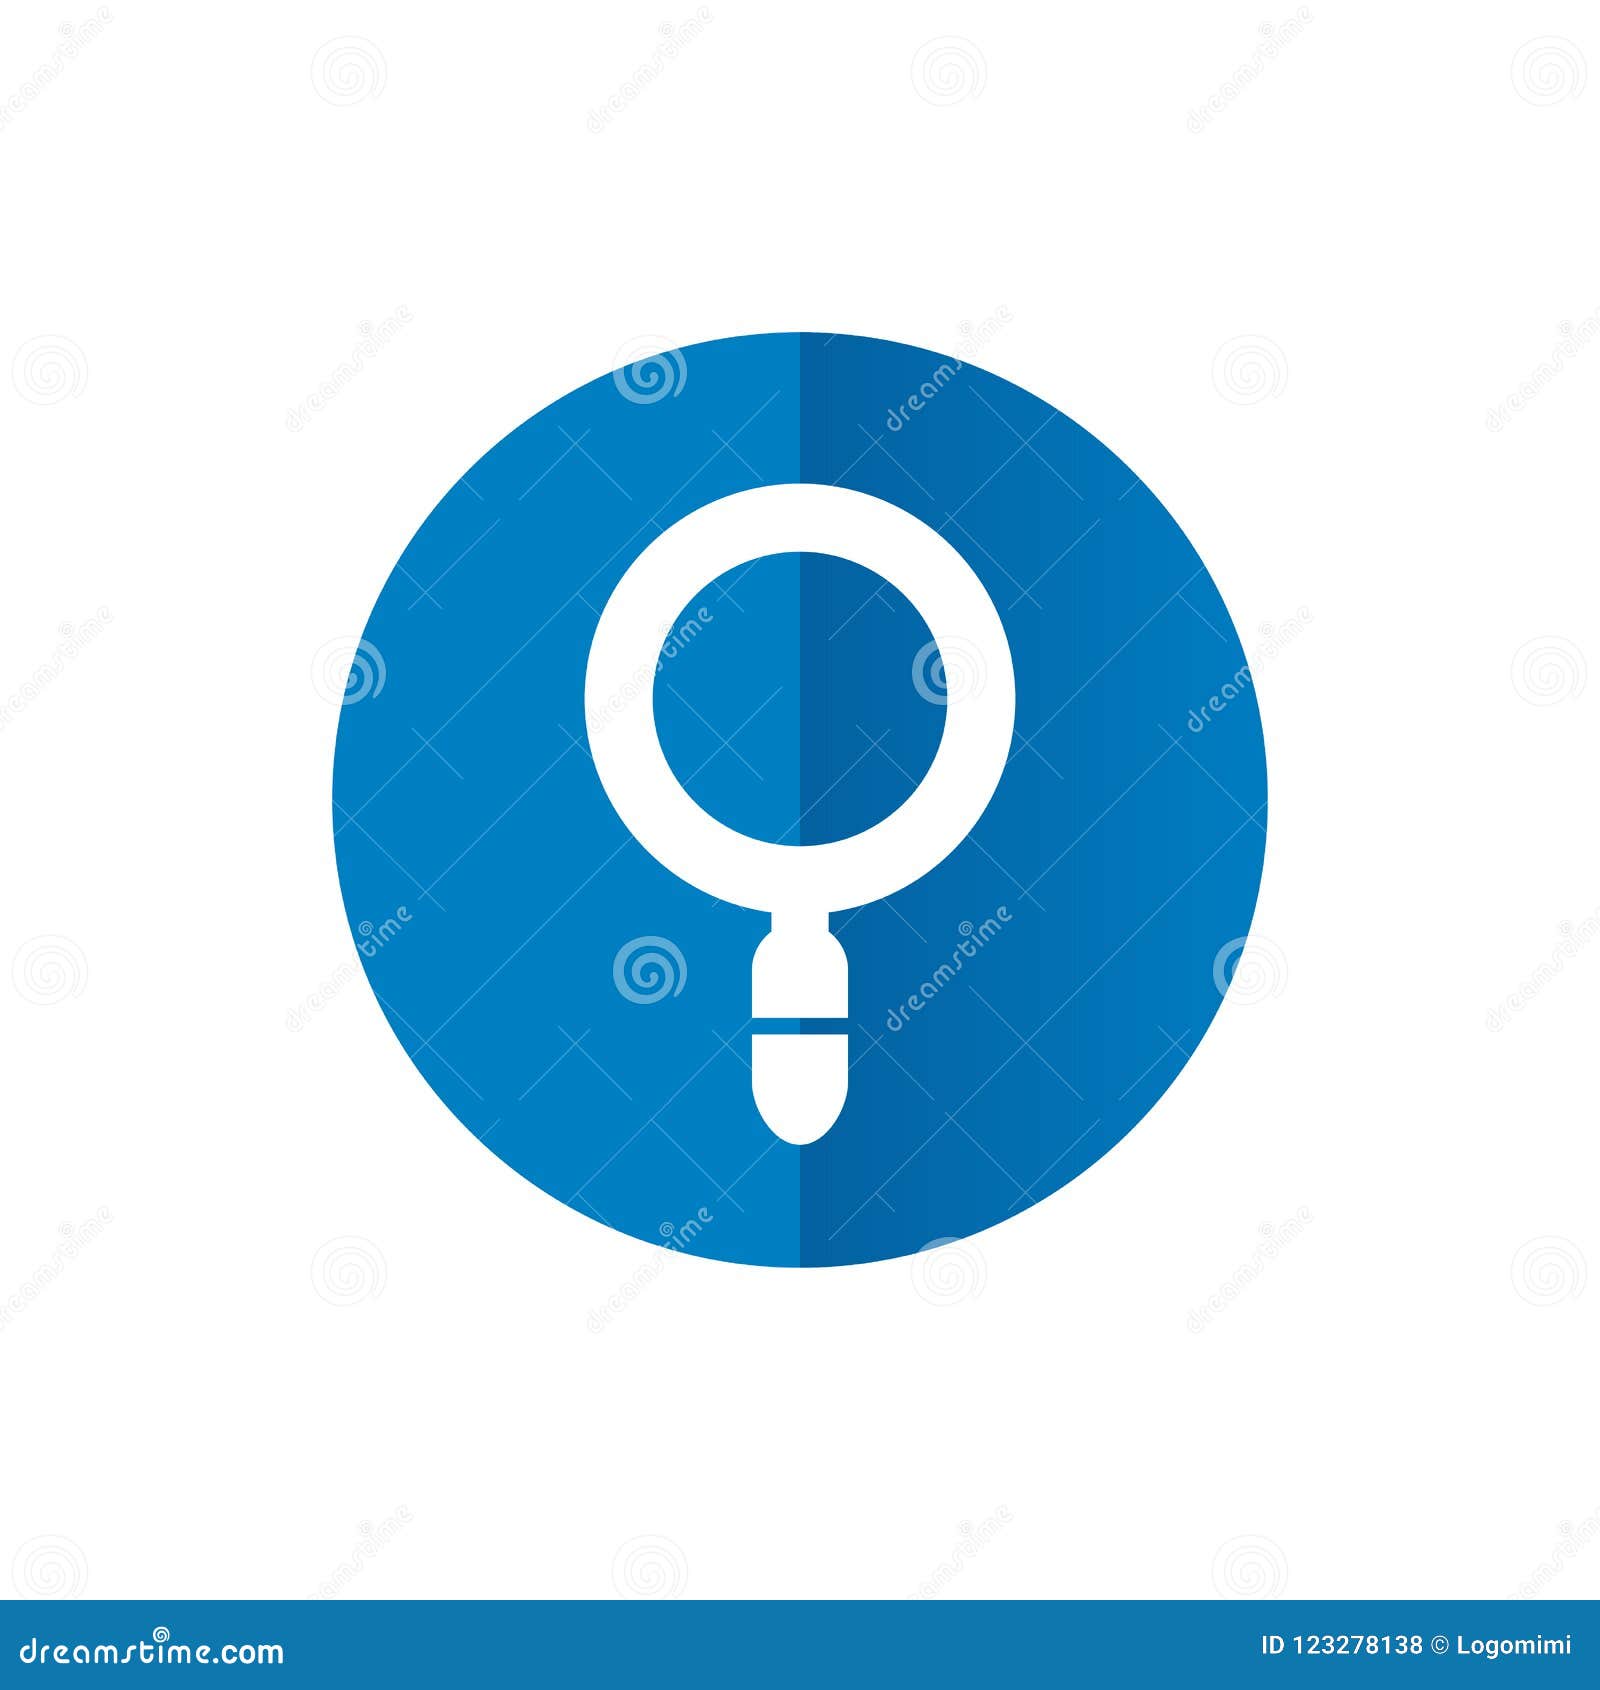 Magnifying Glass Icon Combined With Blue Circle Shape Vector